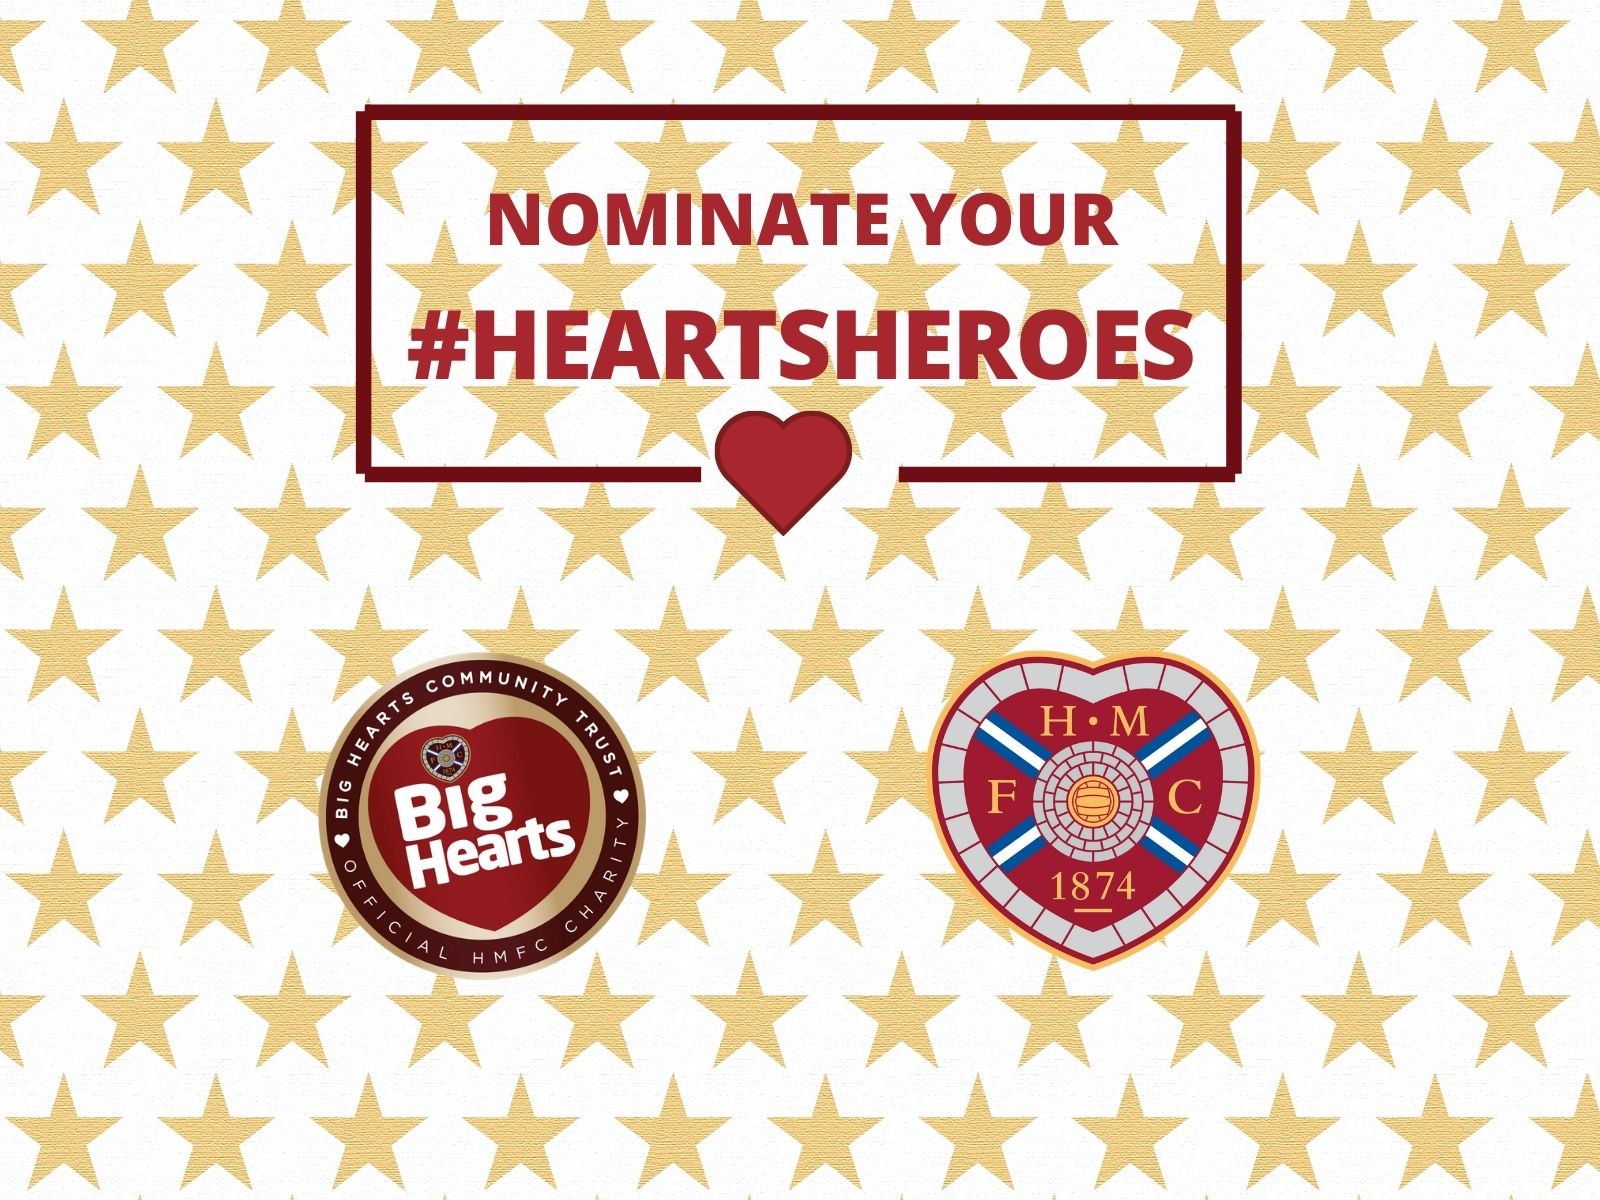  » Help us recognise the efforts from #HeartsHeroes during Covid-19!